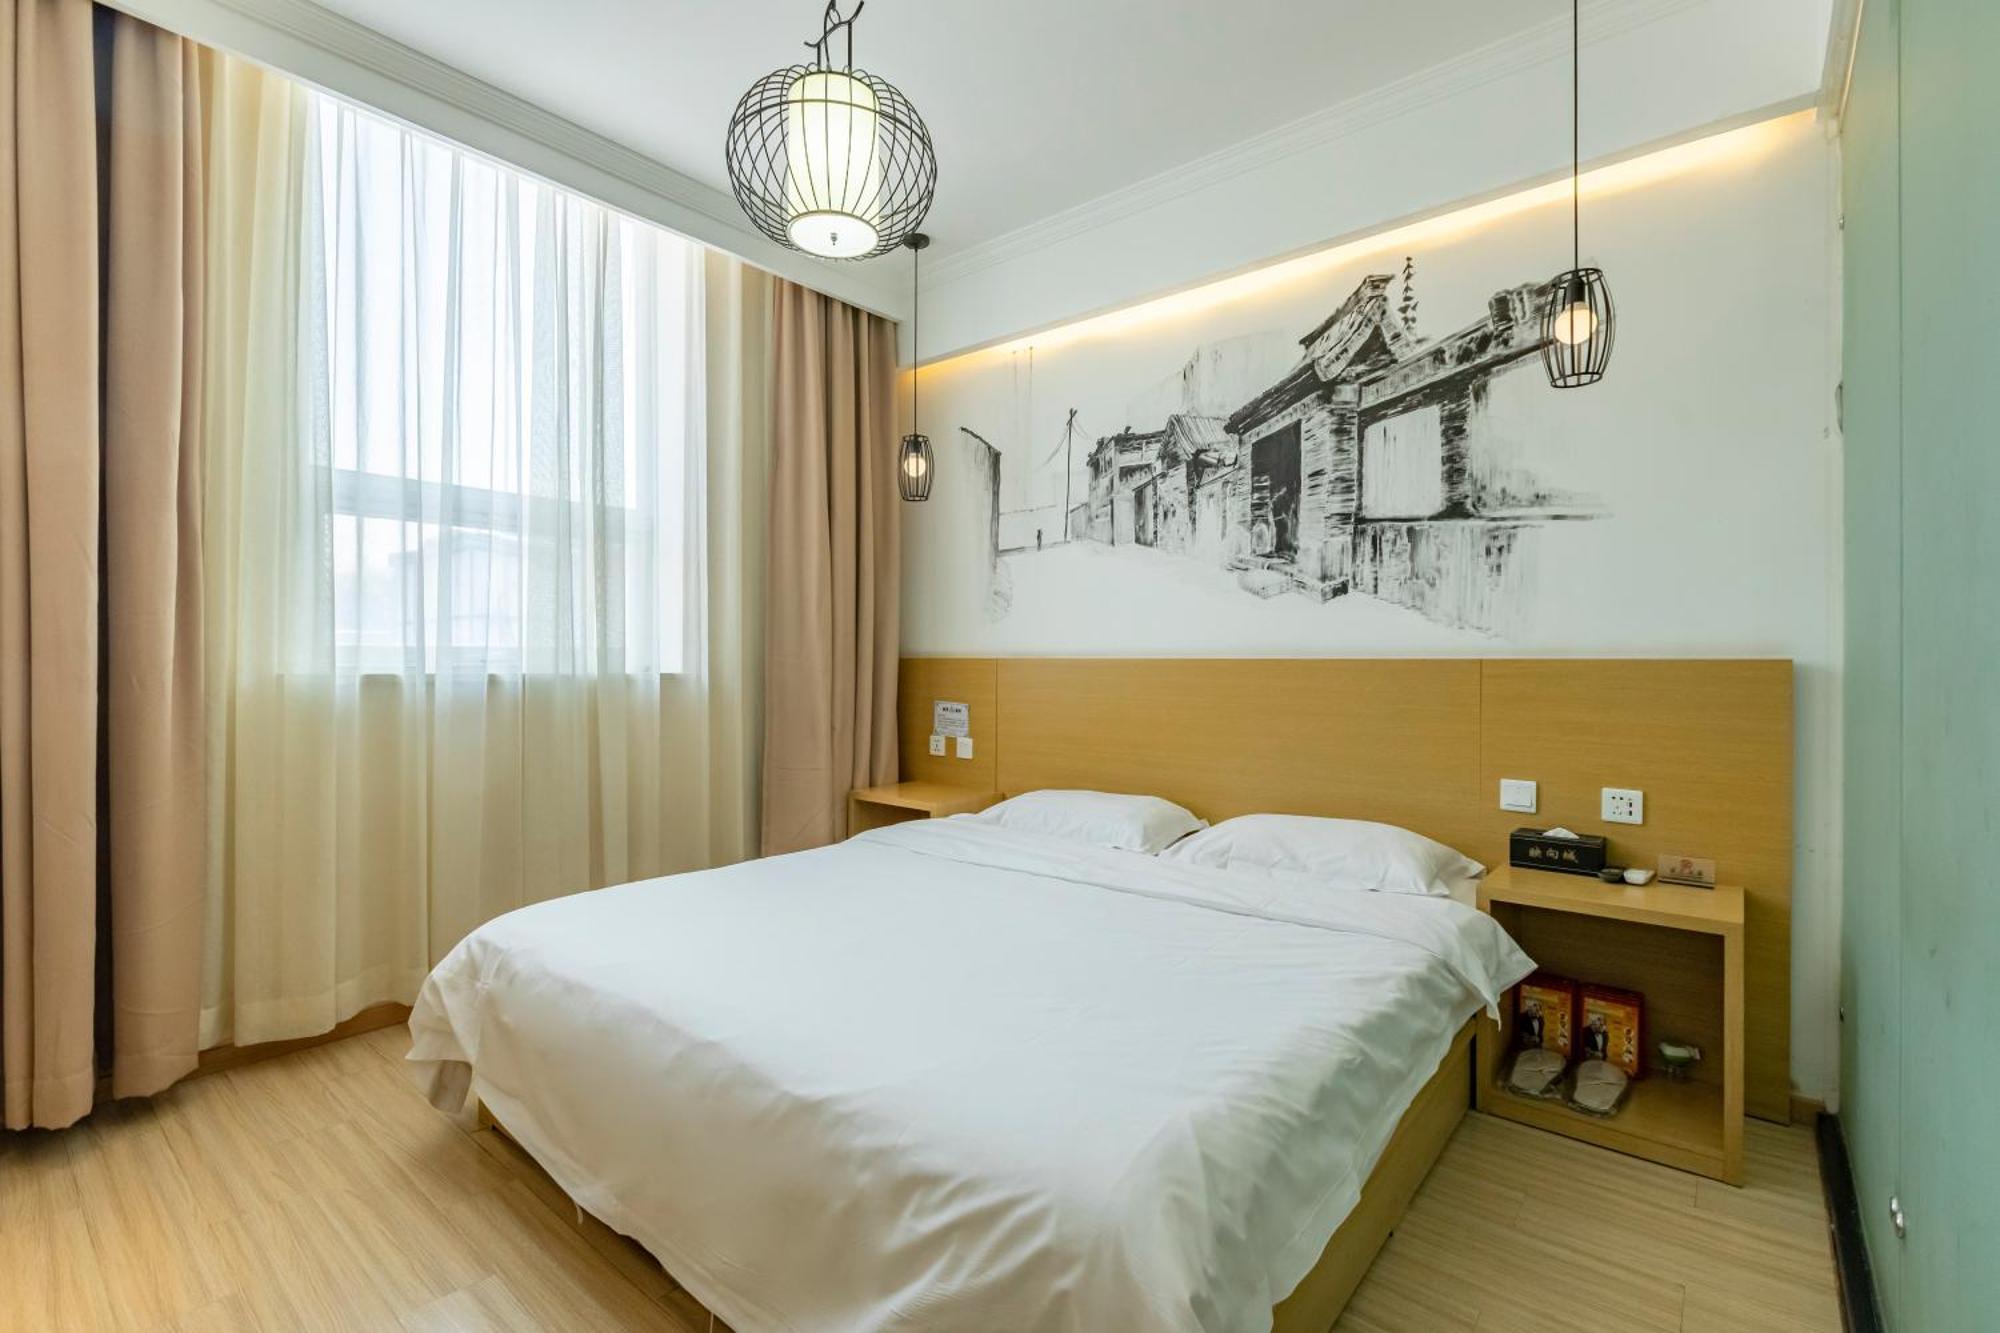 Happy Dragon Alley Hotel-In The City Center With Big Window&Free Coffe, Fluent English Speaking,Tourist Attractions Ticket Service&Food Recommendation,Near Tian Anmen Forbiddencity,Near Lama Temple,Easy To Walk To Nanluoalley&Shichahai Peking Exteriér fotografie